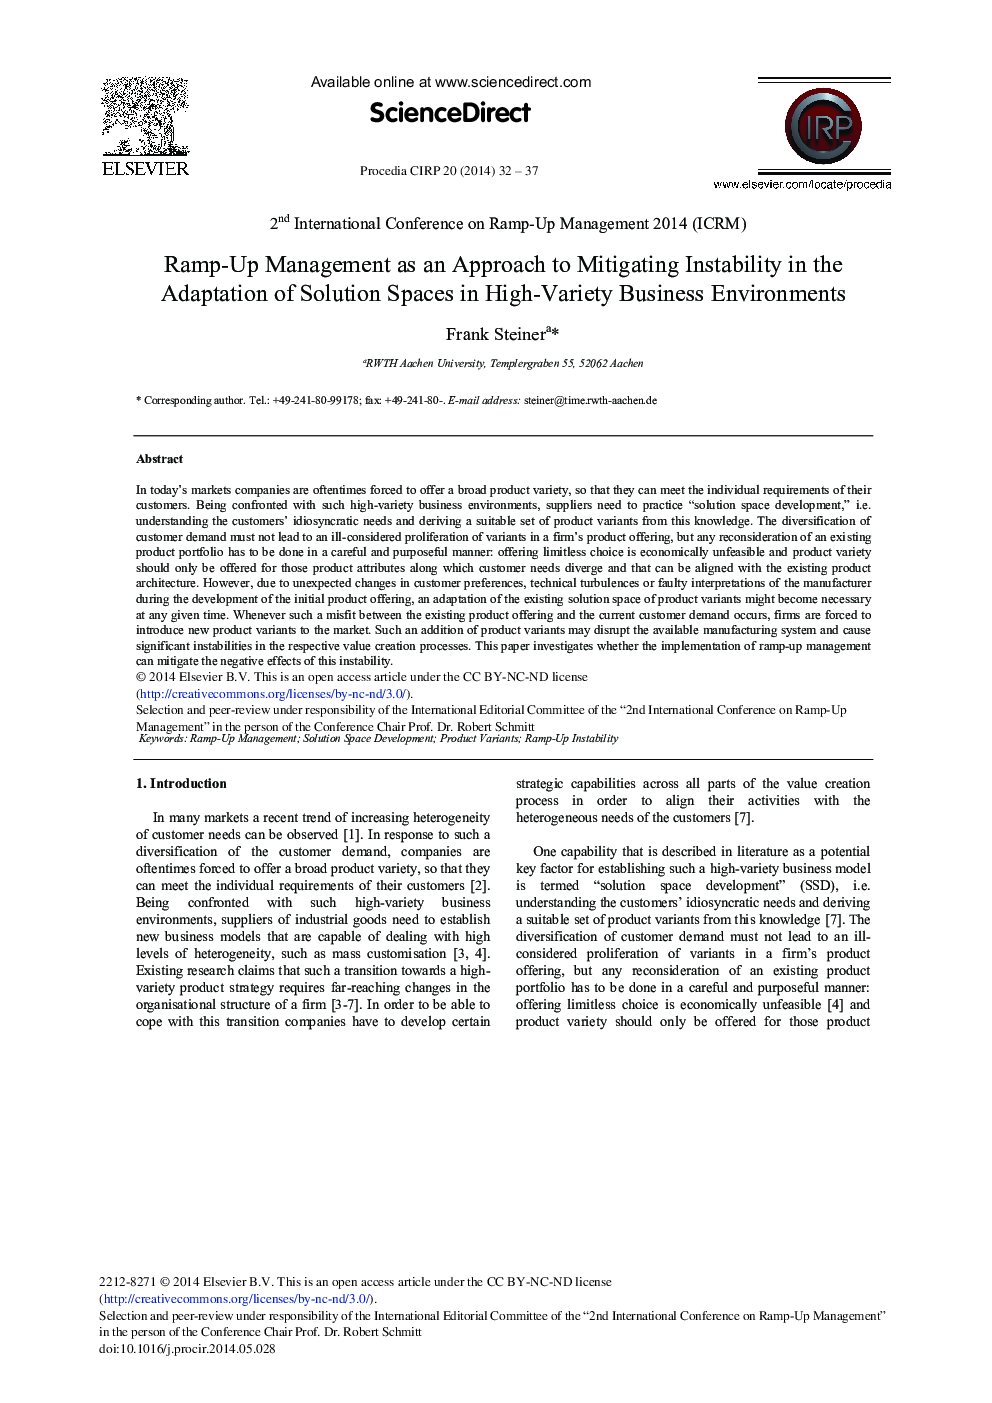 Ramp-up Management as an Approach to Mitigating Instability in the Adaptation of Solution Spaces in High-Variety Business Environments